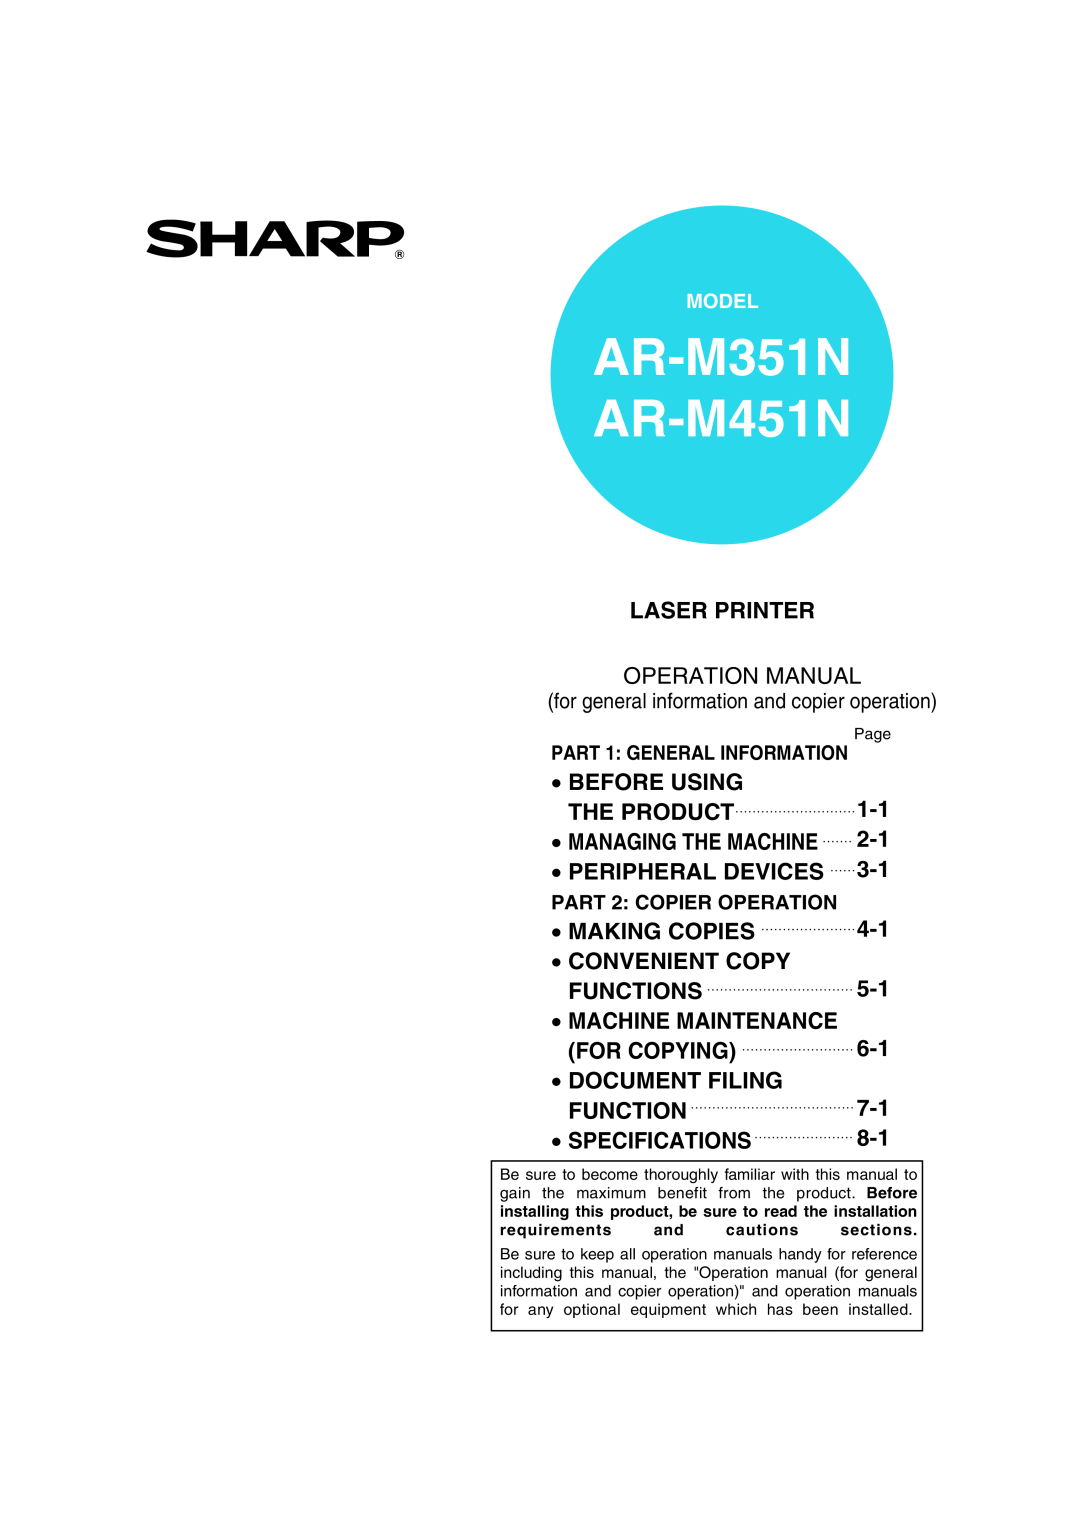 Sharp AR-M451N specifications Laser Printer, Before Using, The Product, Peripheral Devices, Making Copies, Convenient Copy 